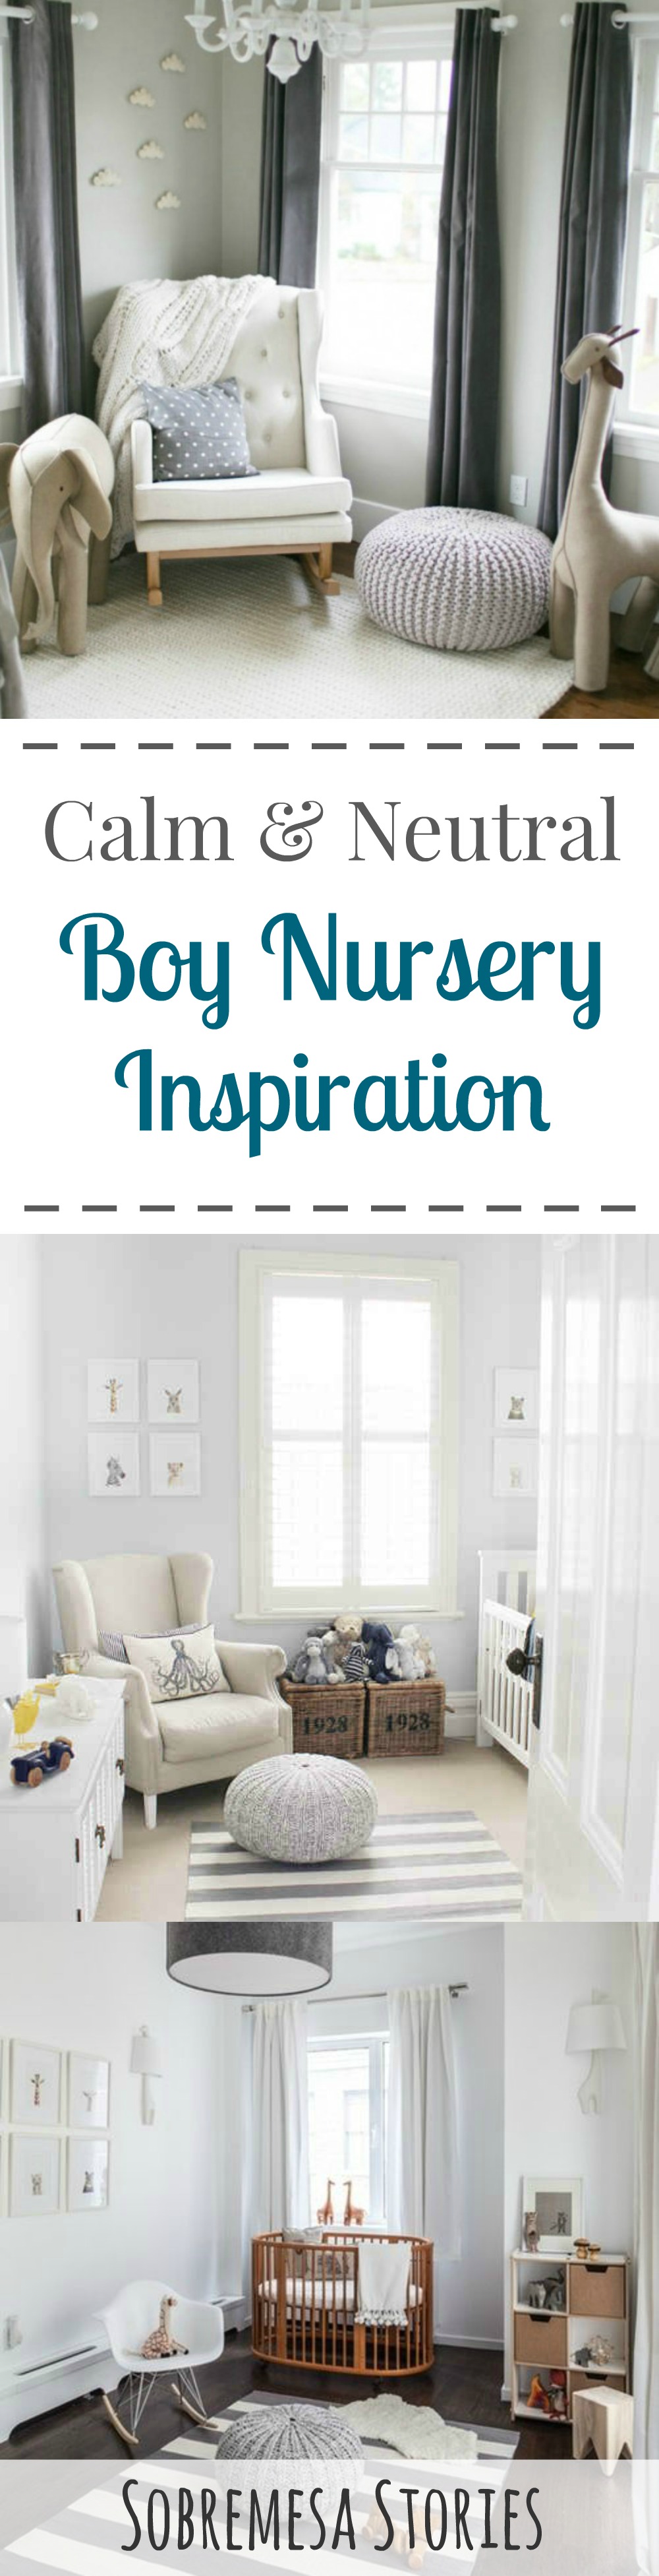 Gorgeous neutral gray boy nursery ideas - perfect if you're expecting a little man but want a crisp and calm nursery space!